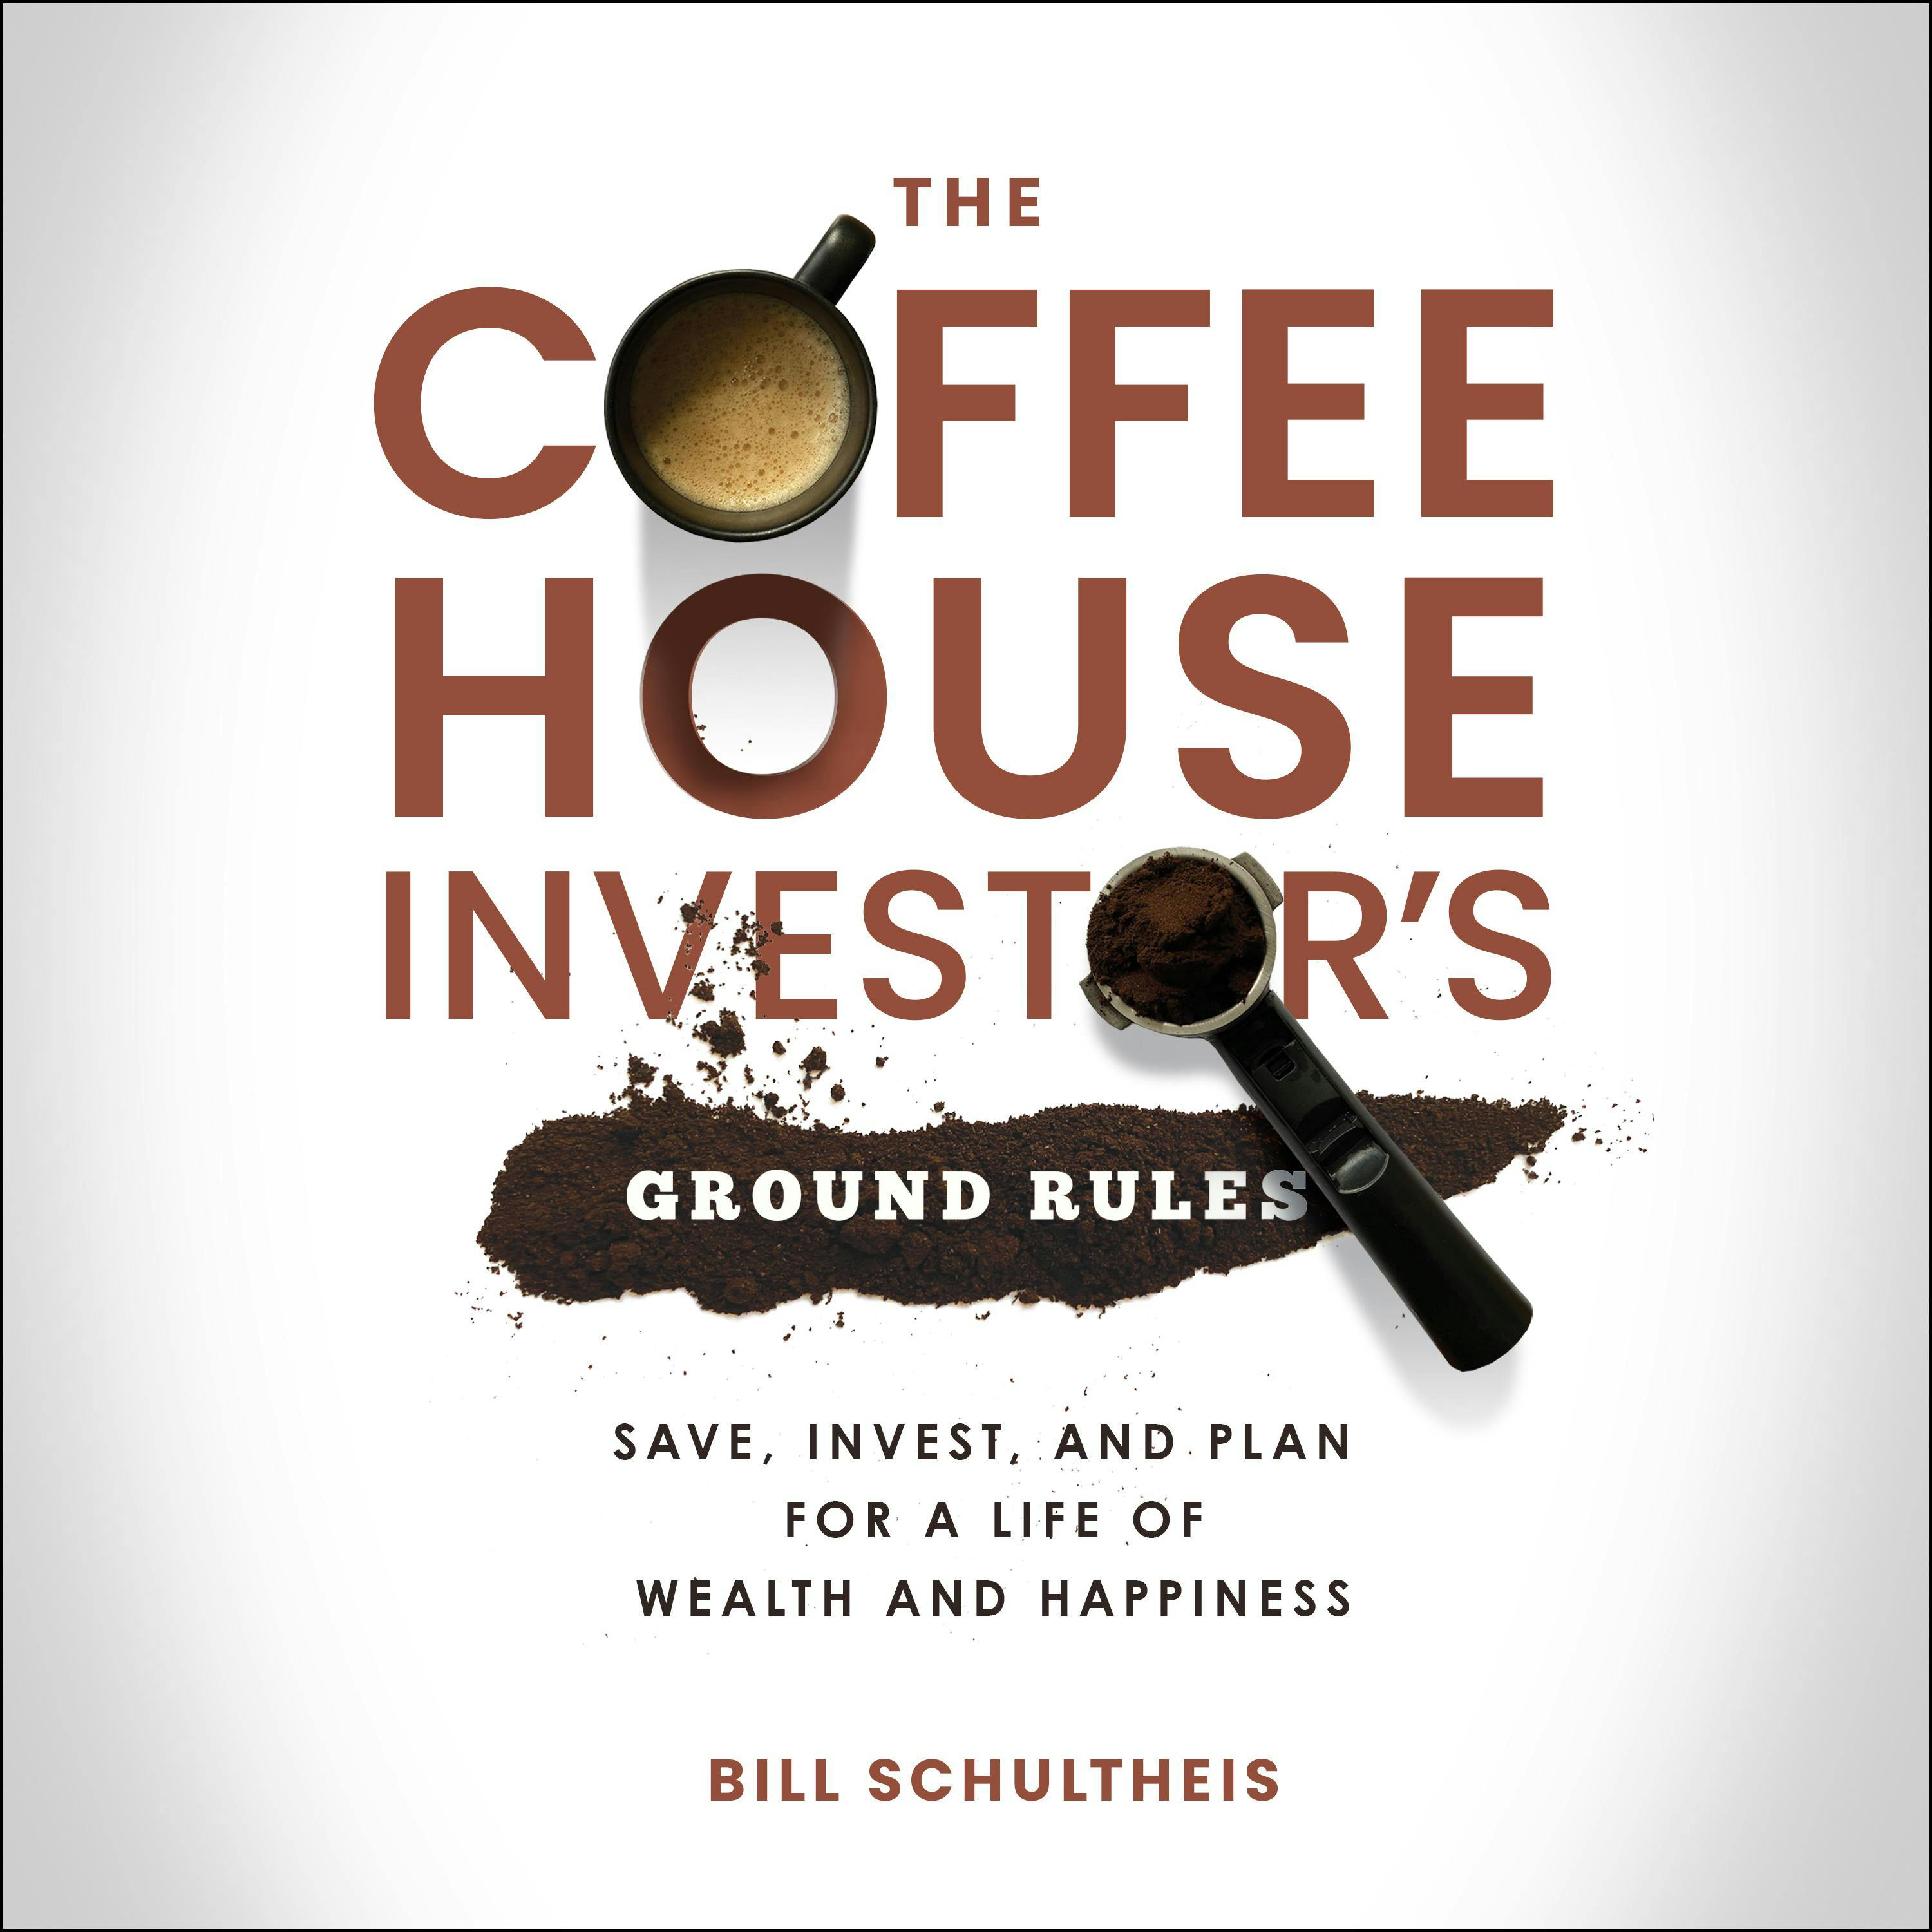 The Coffeehouse Investor's Ground Rules: Save, Invest, and Plan for a Life of Wealth and Happiness - Bill Schultheis